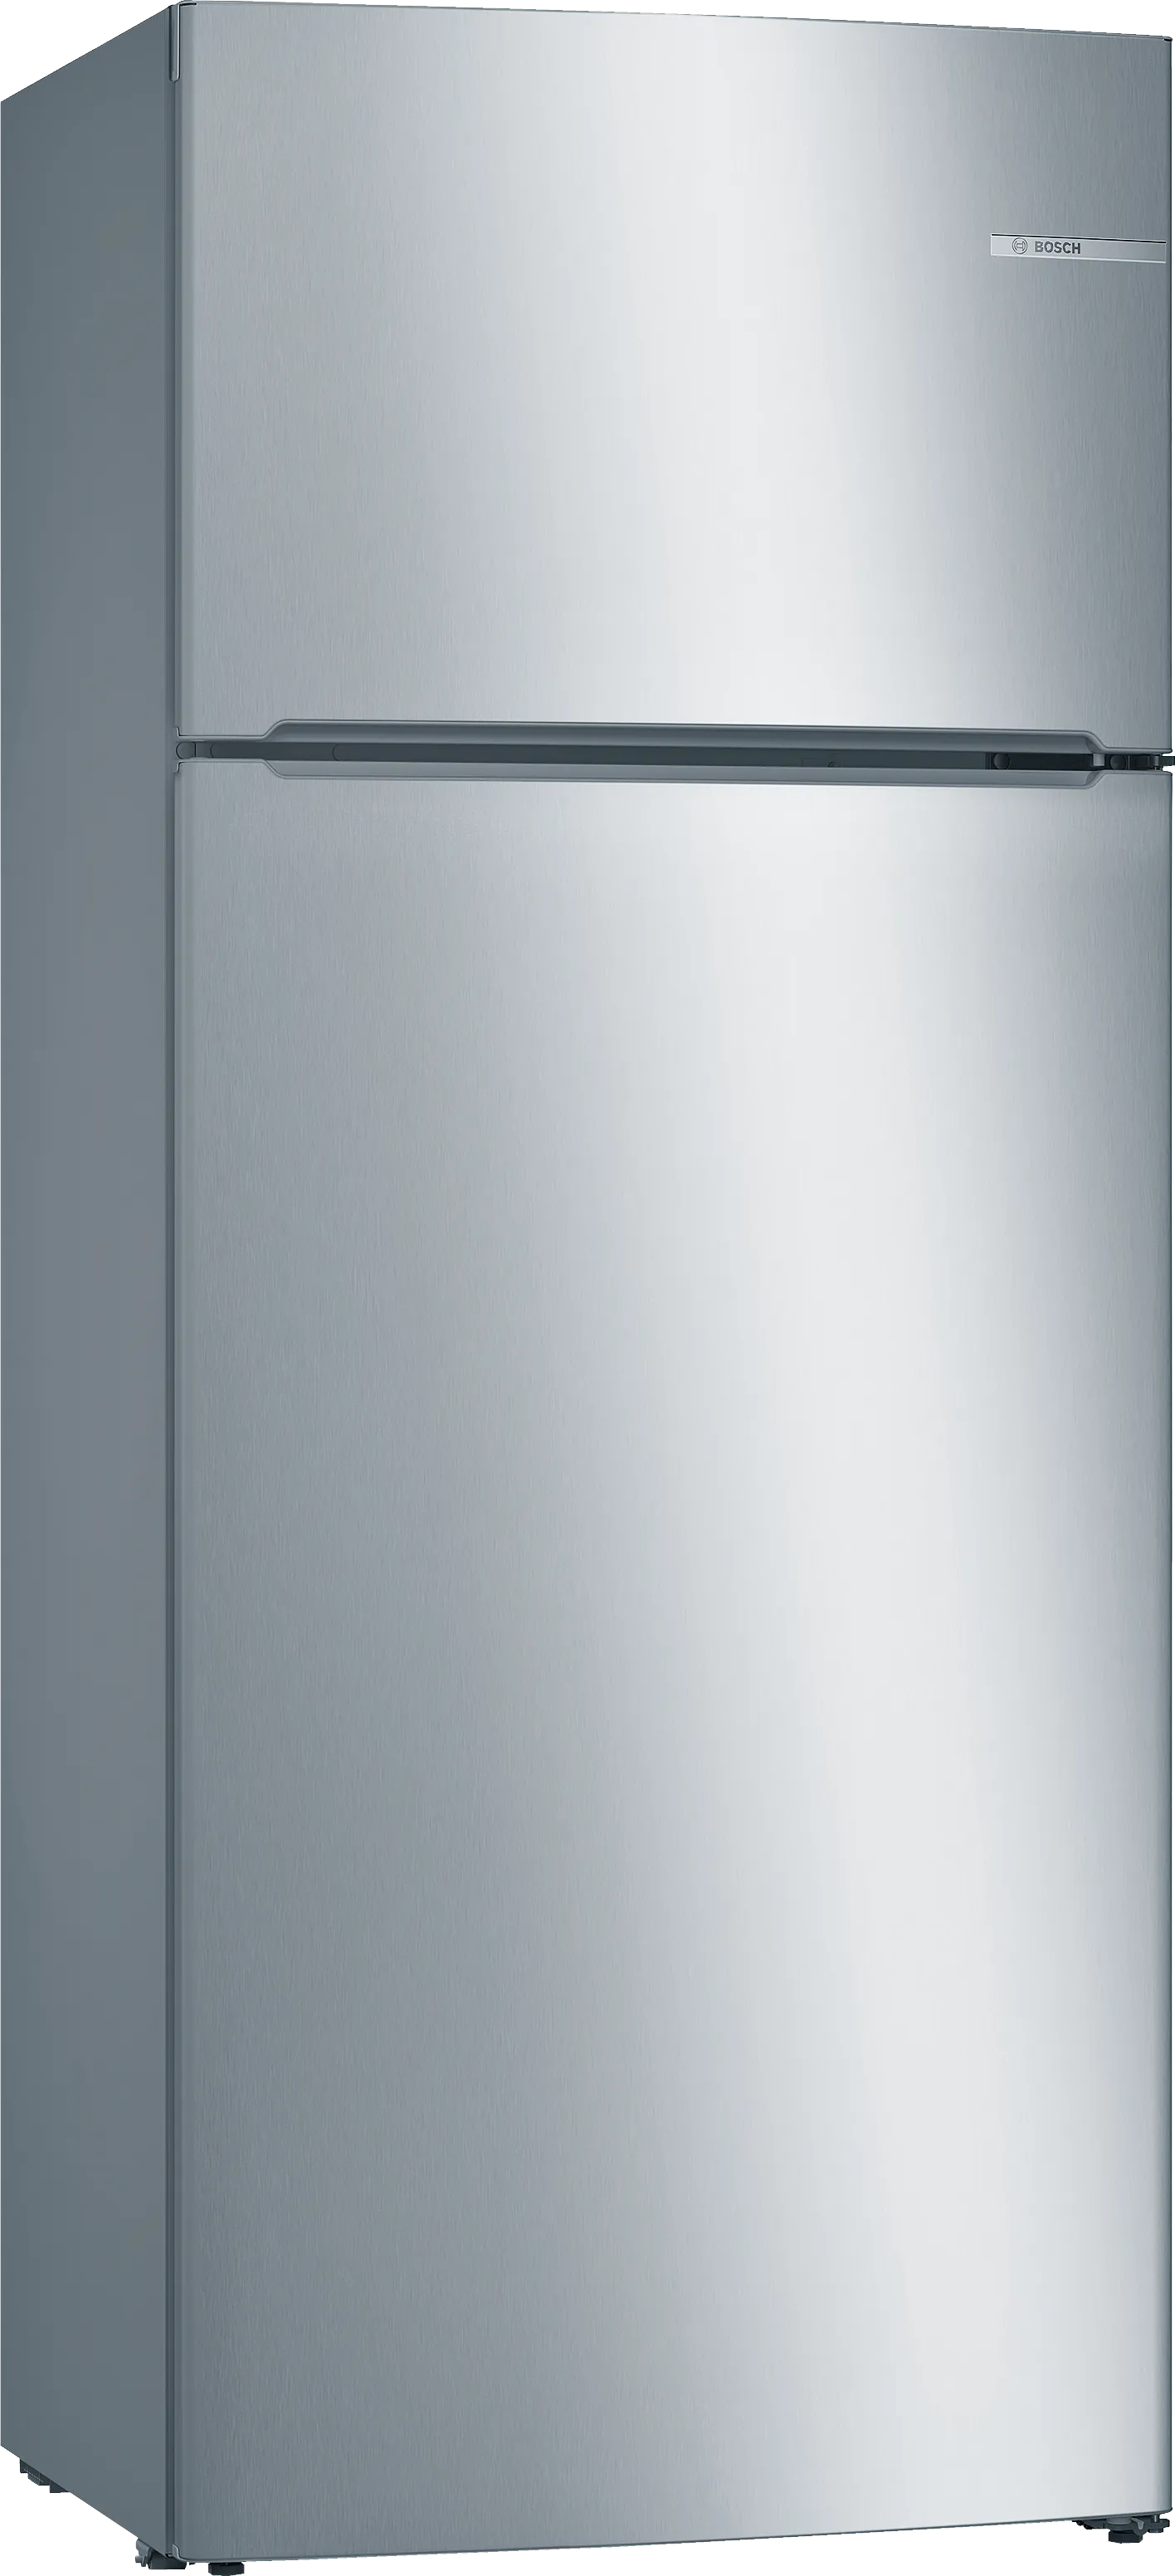 Series 4 free-standing fridge-freezer with freezer at top 171 x 70 cm Stainless steel look 